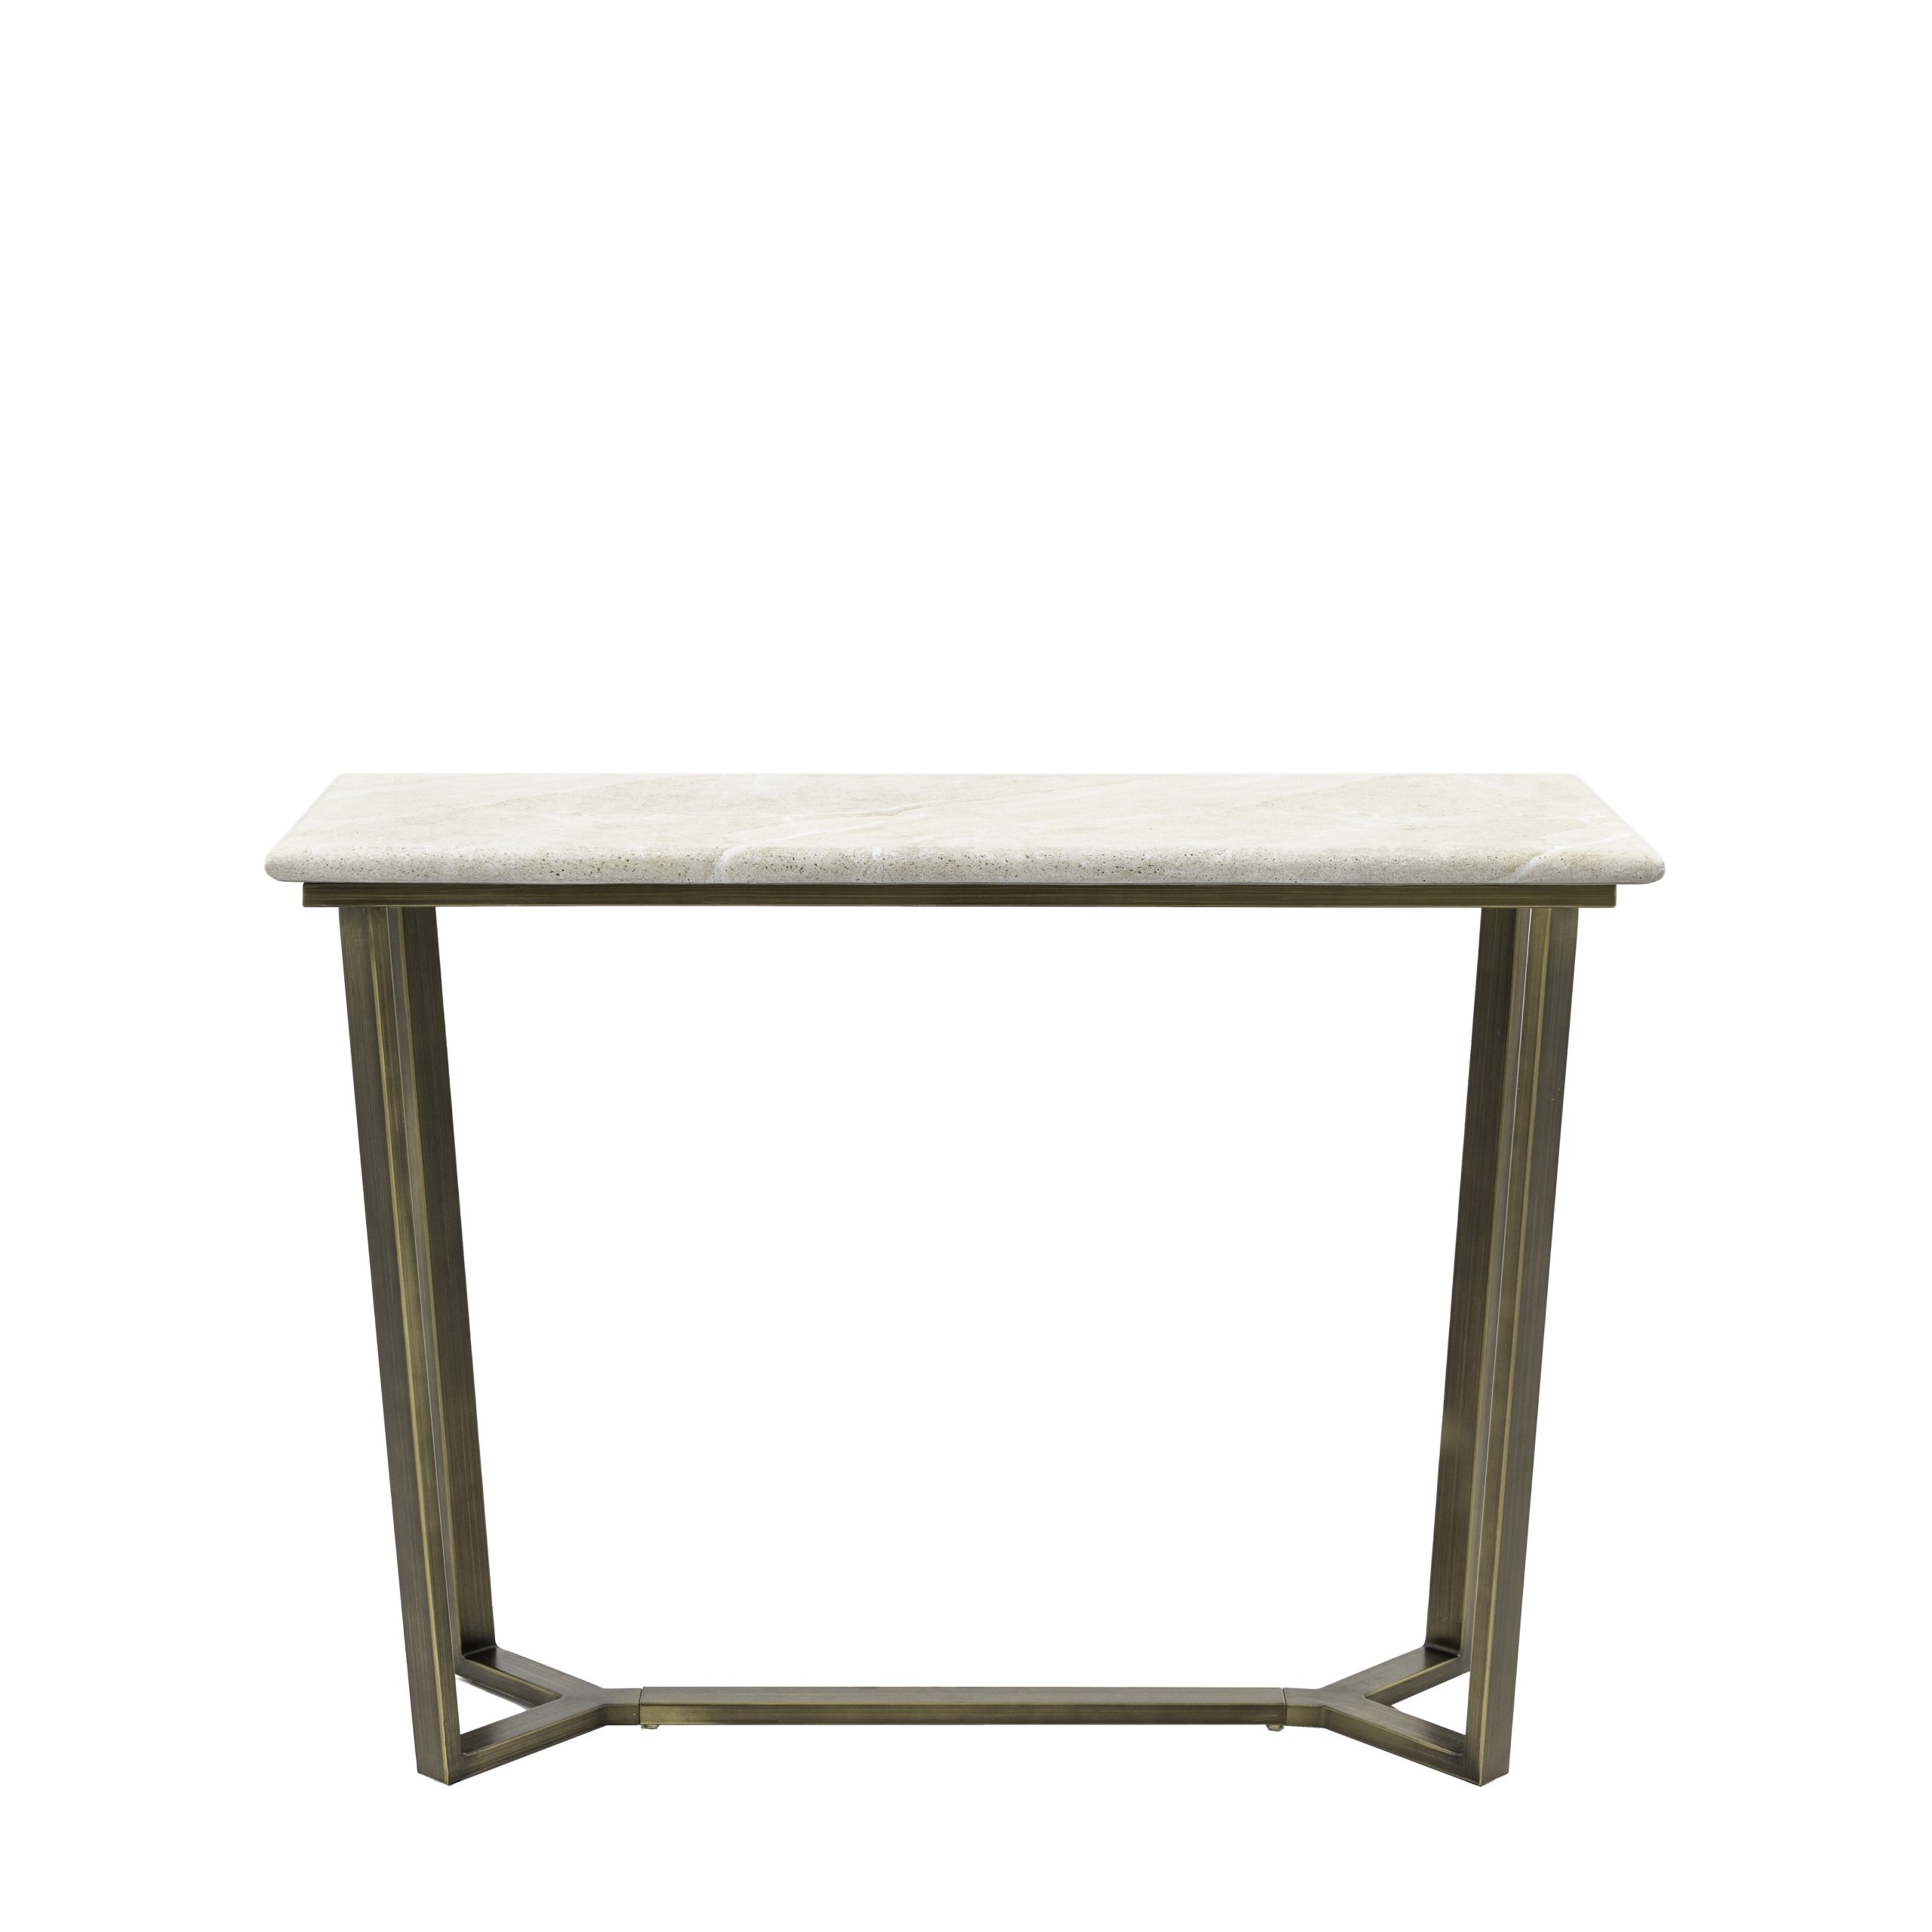 Gallery Direct Moderna Console Table